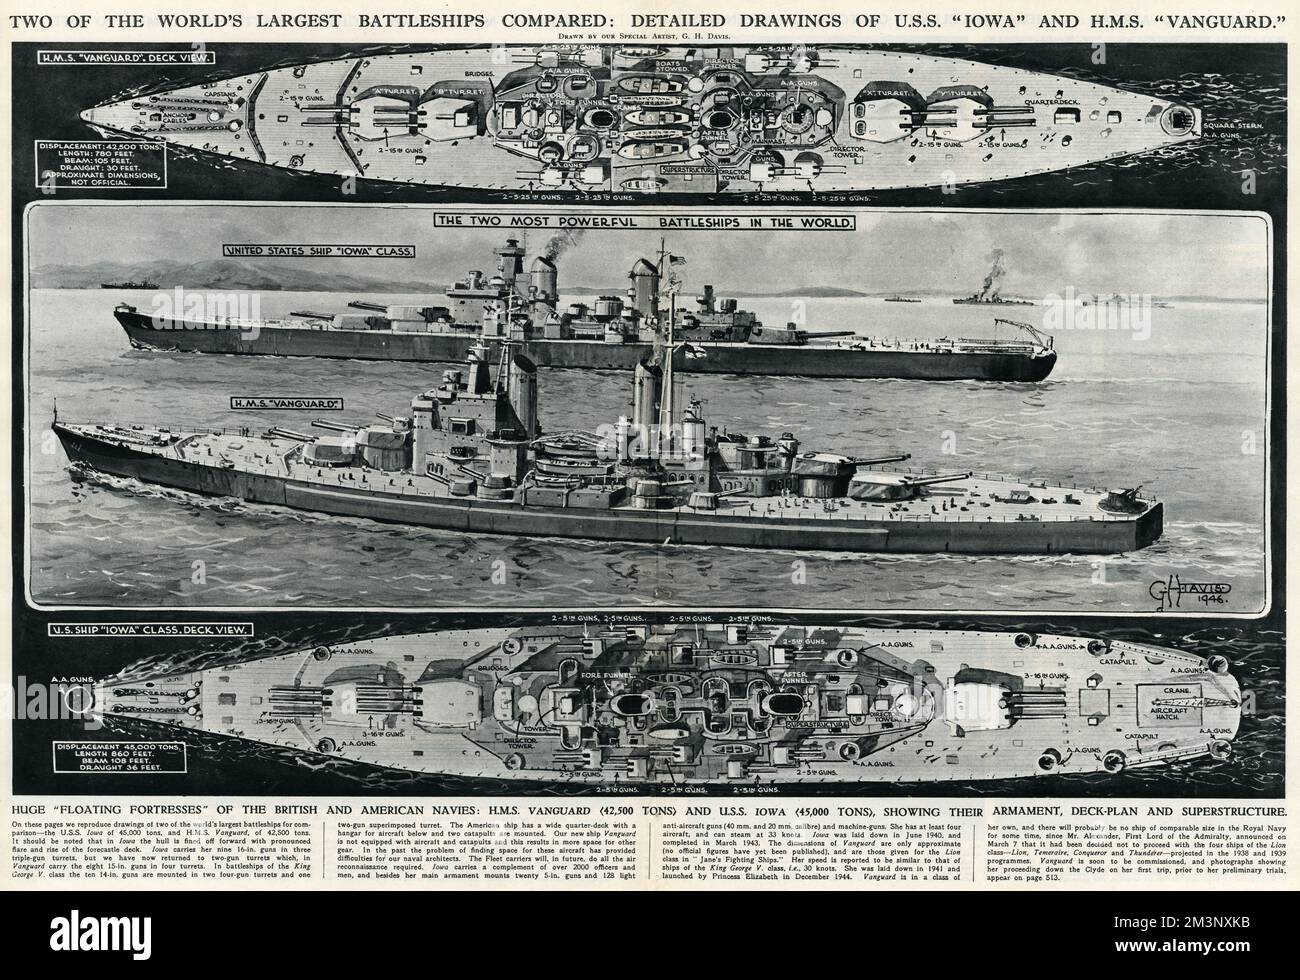 A comparison of the American Iowa battleship, and the British H.M.S. Vanguard. The ships are each given dimensions and a deck view, which details the ship guns and command centers. The illustration itself describes the battleships as &quot;the two most powerful battleships in the world&quot;.  1946 Stock Photo